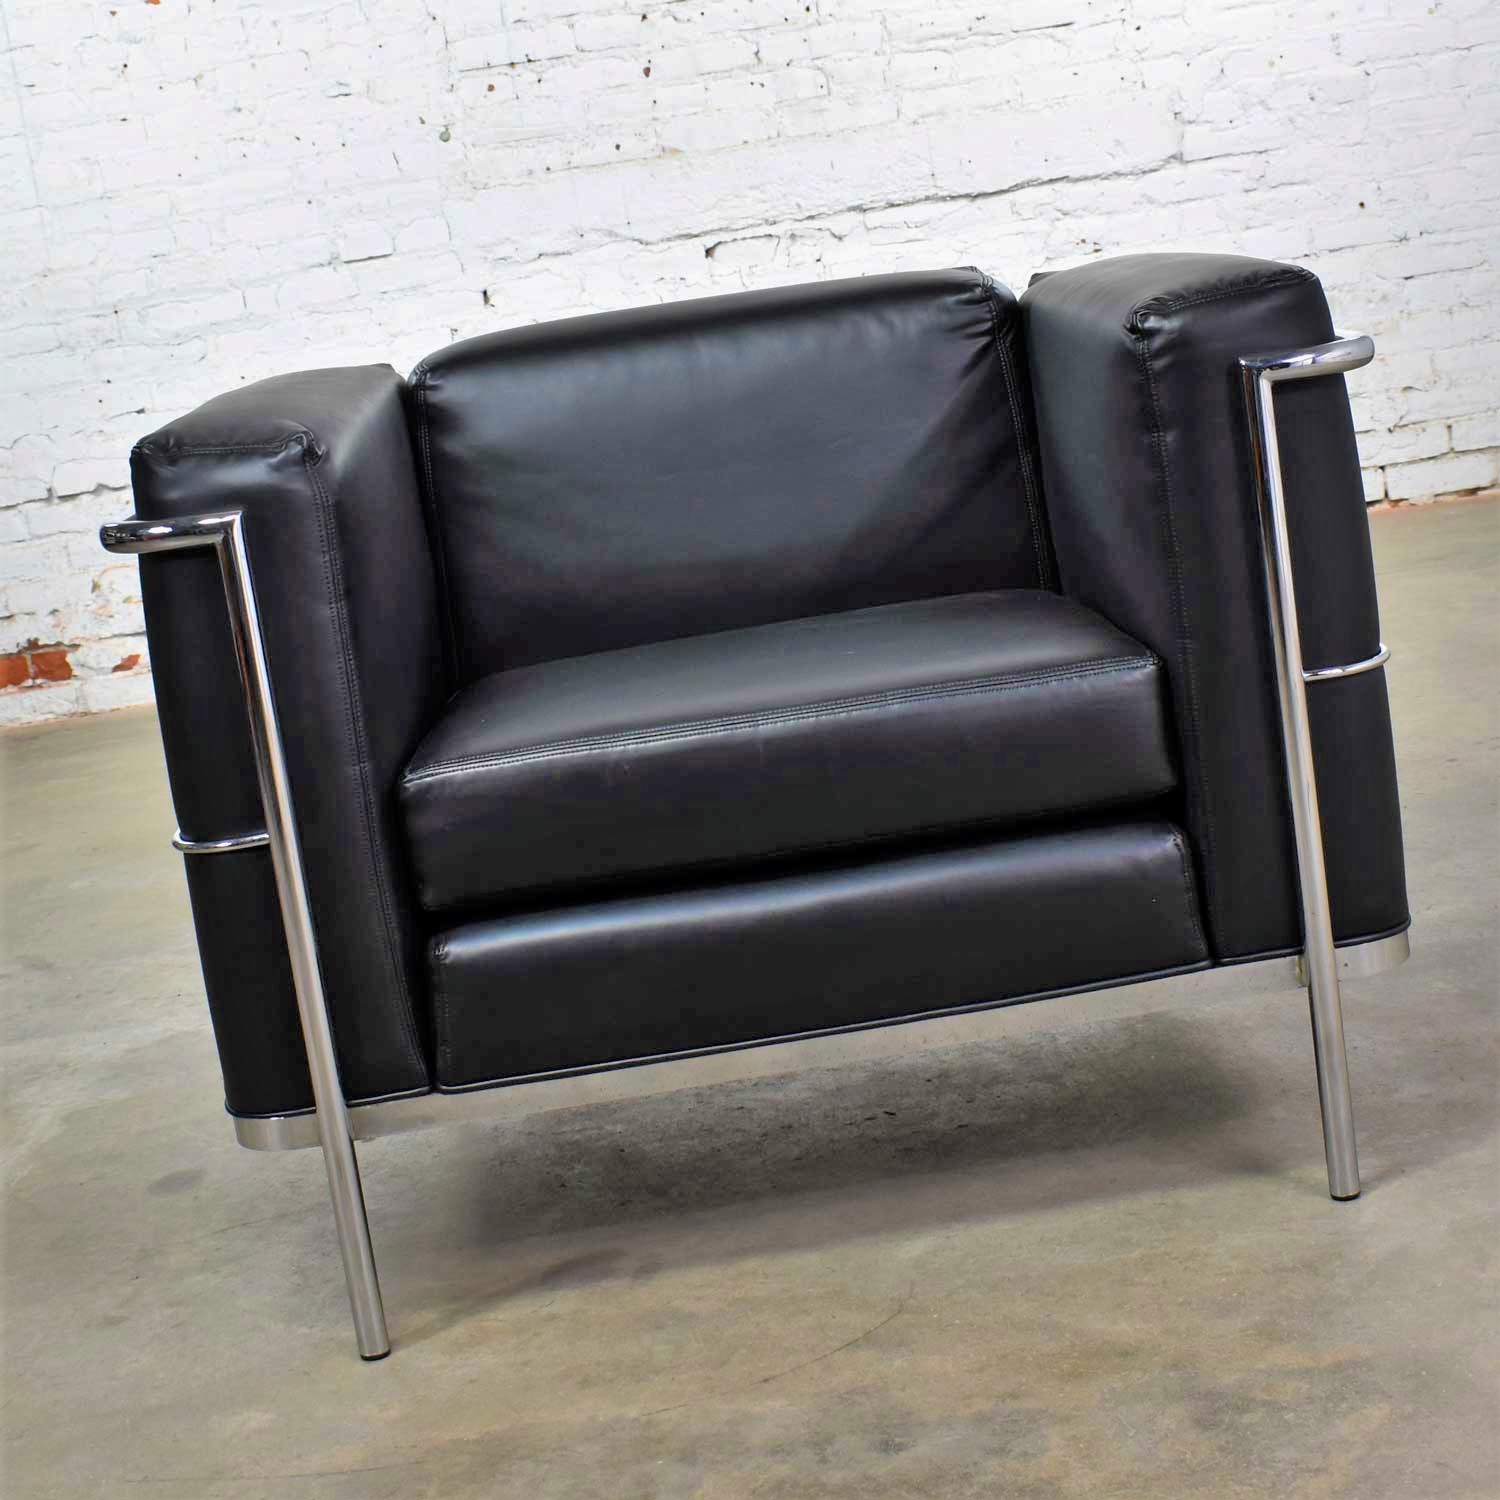 Vintage Jack Cartwright 20/123 Club Chair in Black Faux Leather After Corbusier LC2